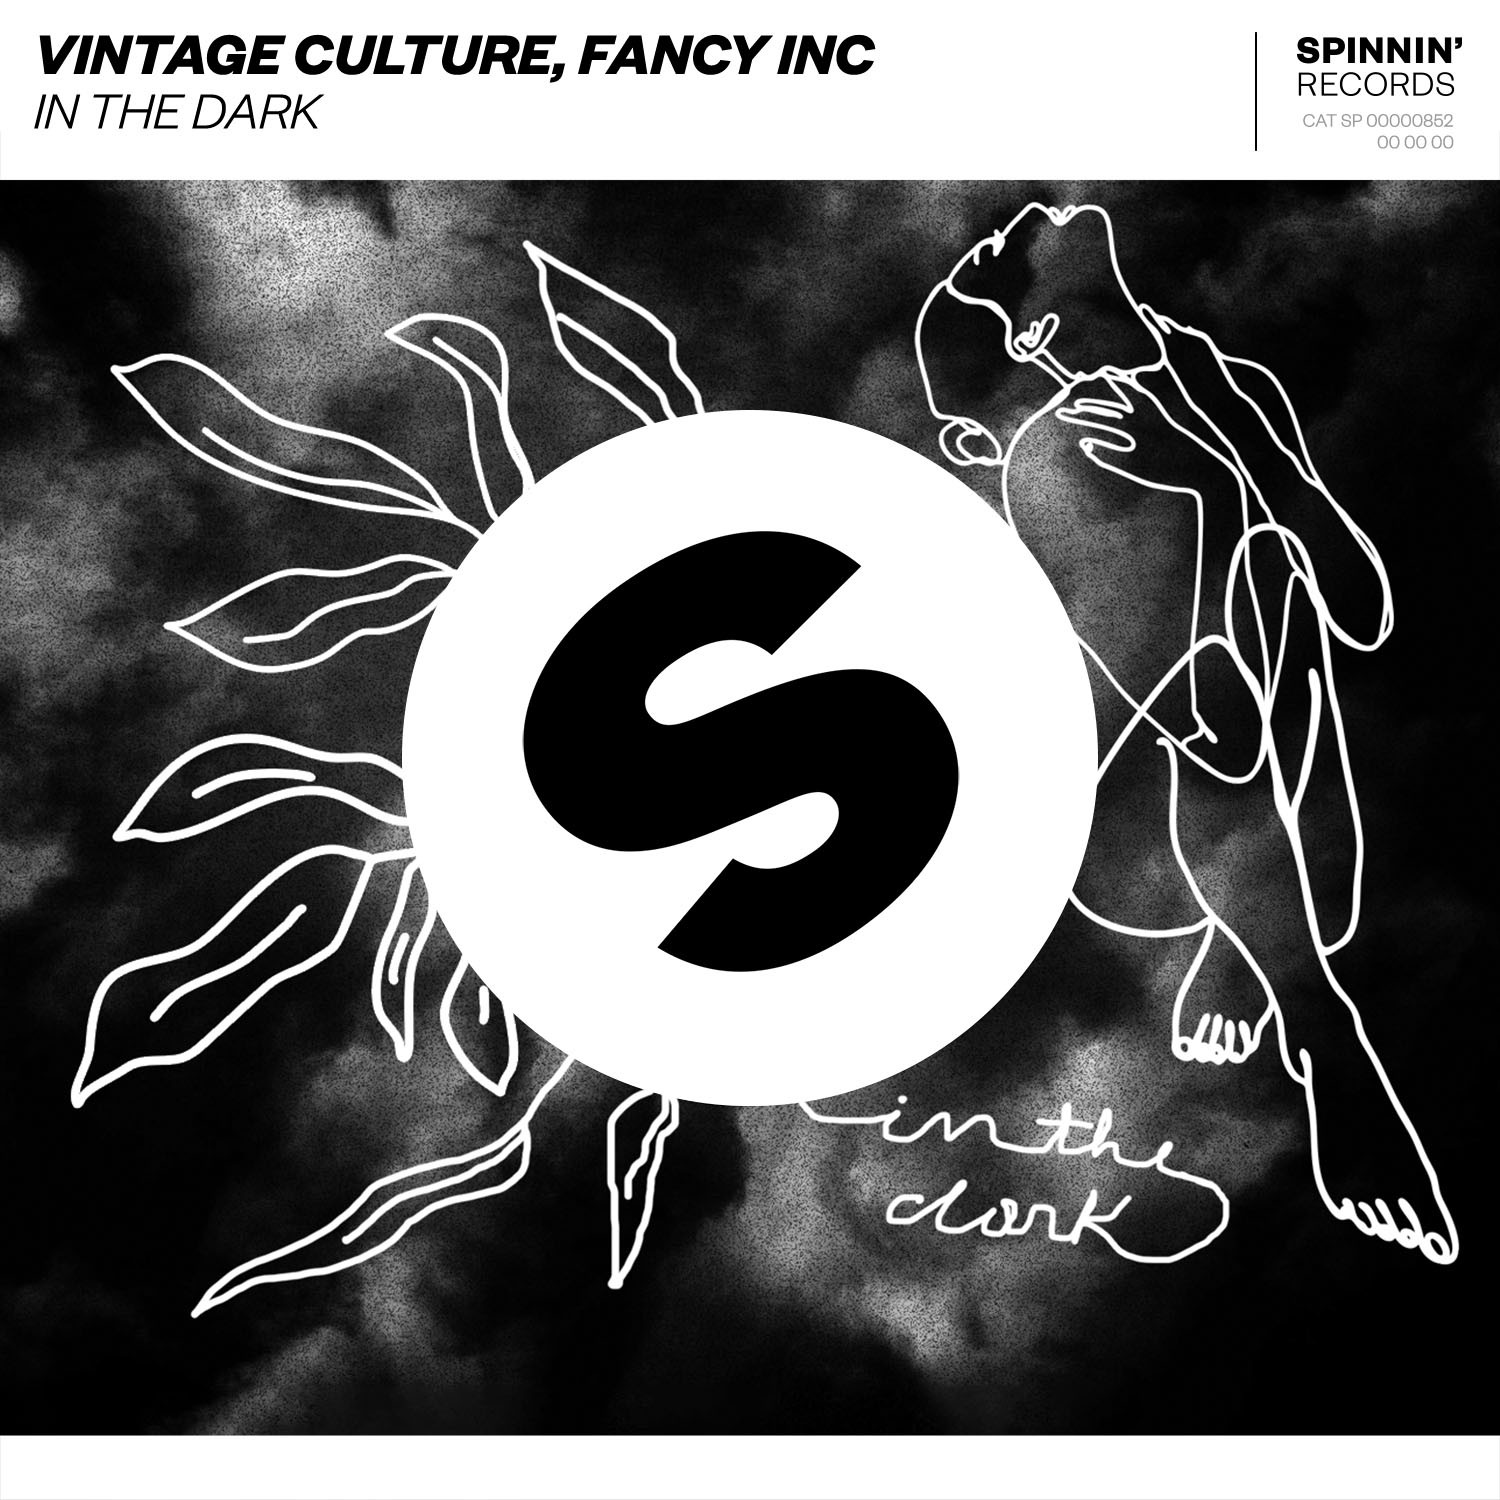 Vintage Culture Fancy Inc In The Dark Spinnin Records Spinnin Records The official facebook page of spinnin' records, the world's biggest dance music. vintage culture fancy inc in the